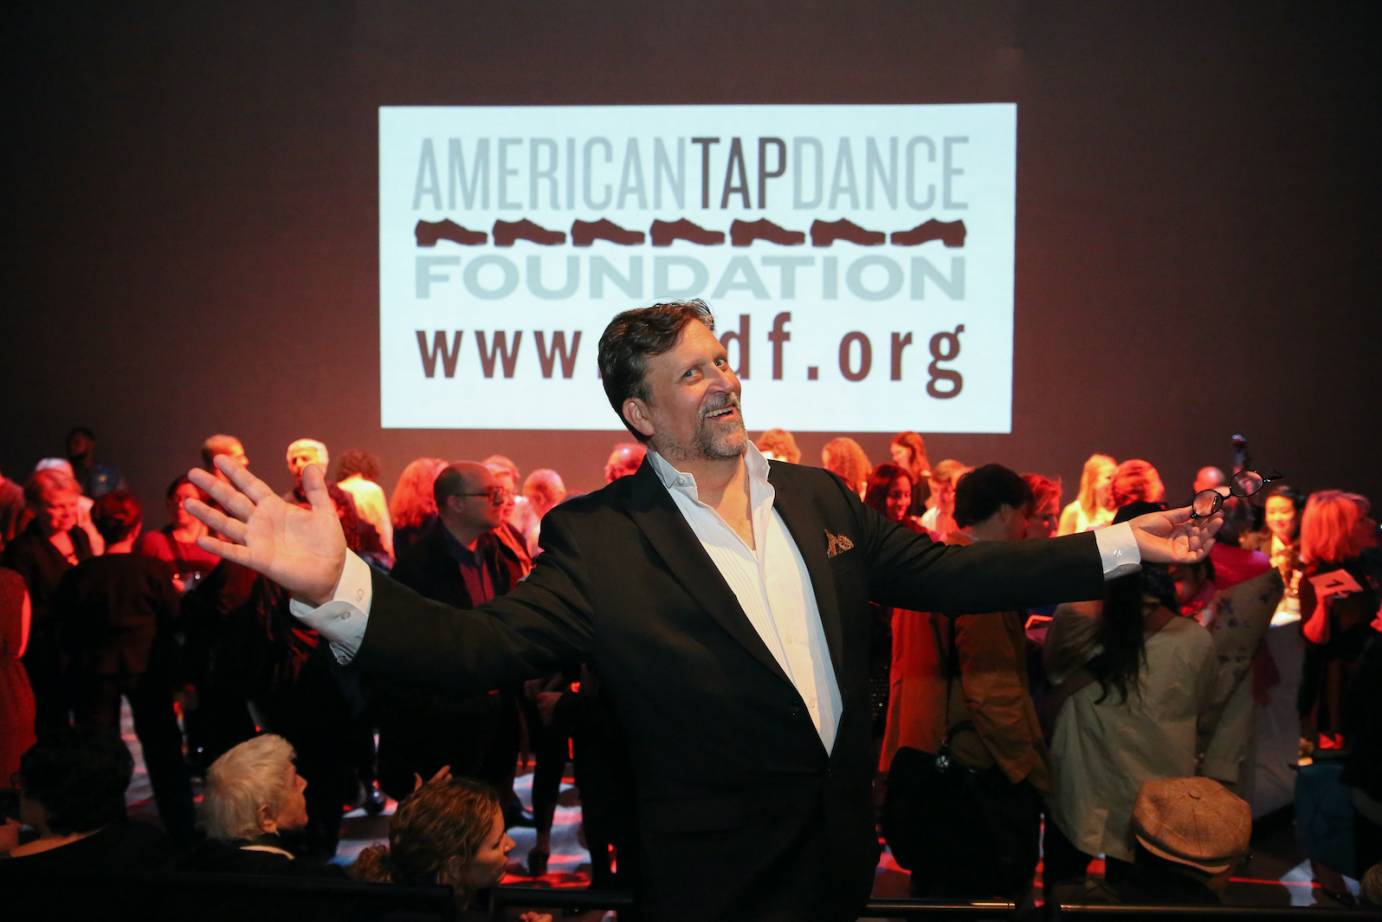 Tony Waag mugs for the camera as a true showman right in front of a sign for the American Tap Foundation 